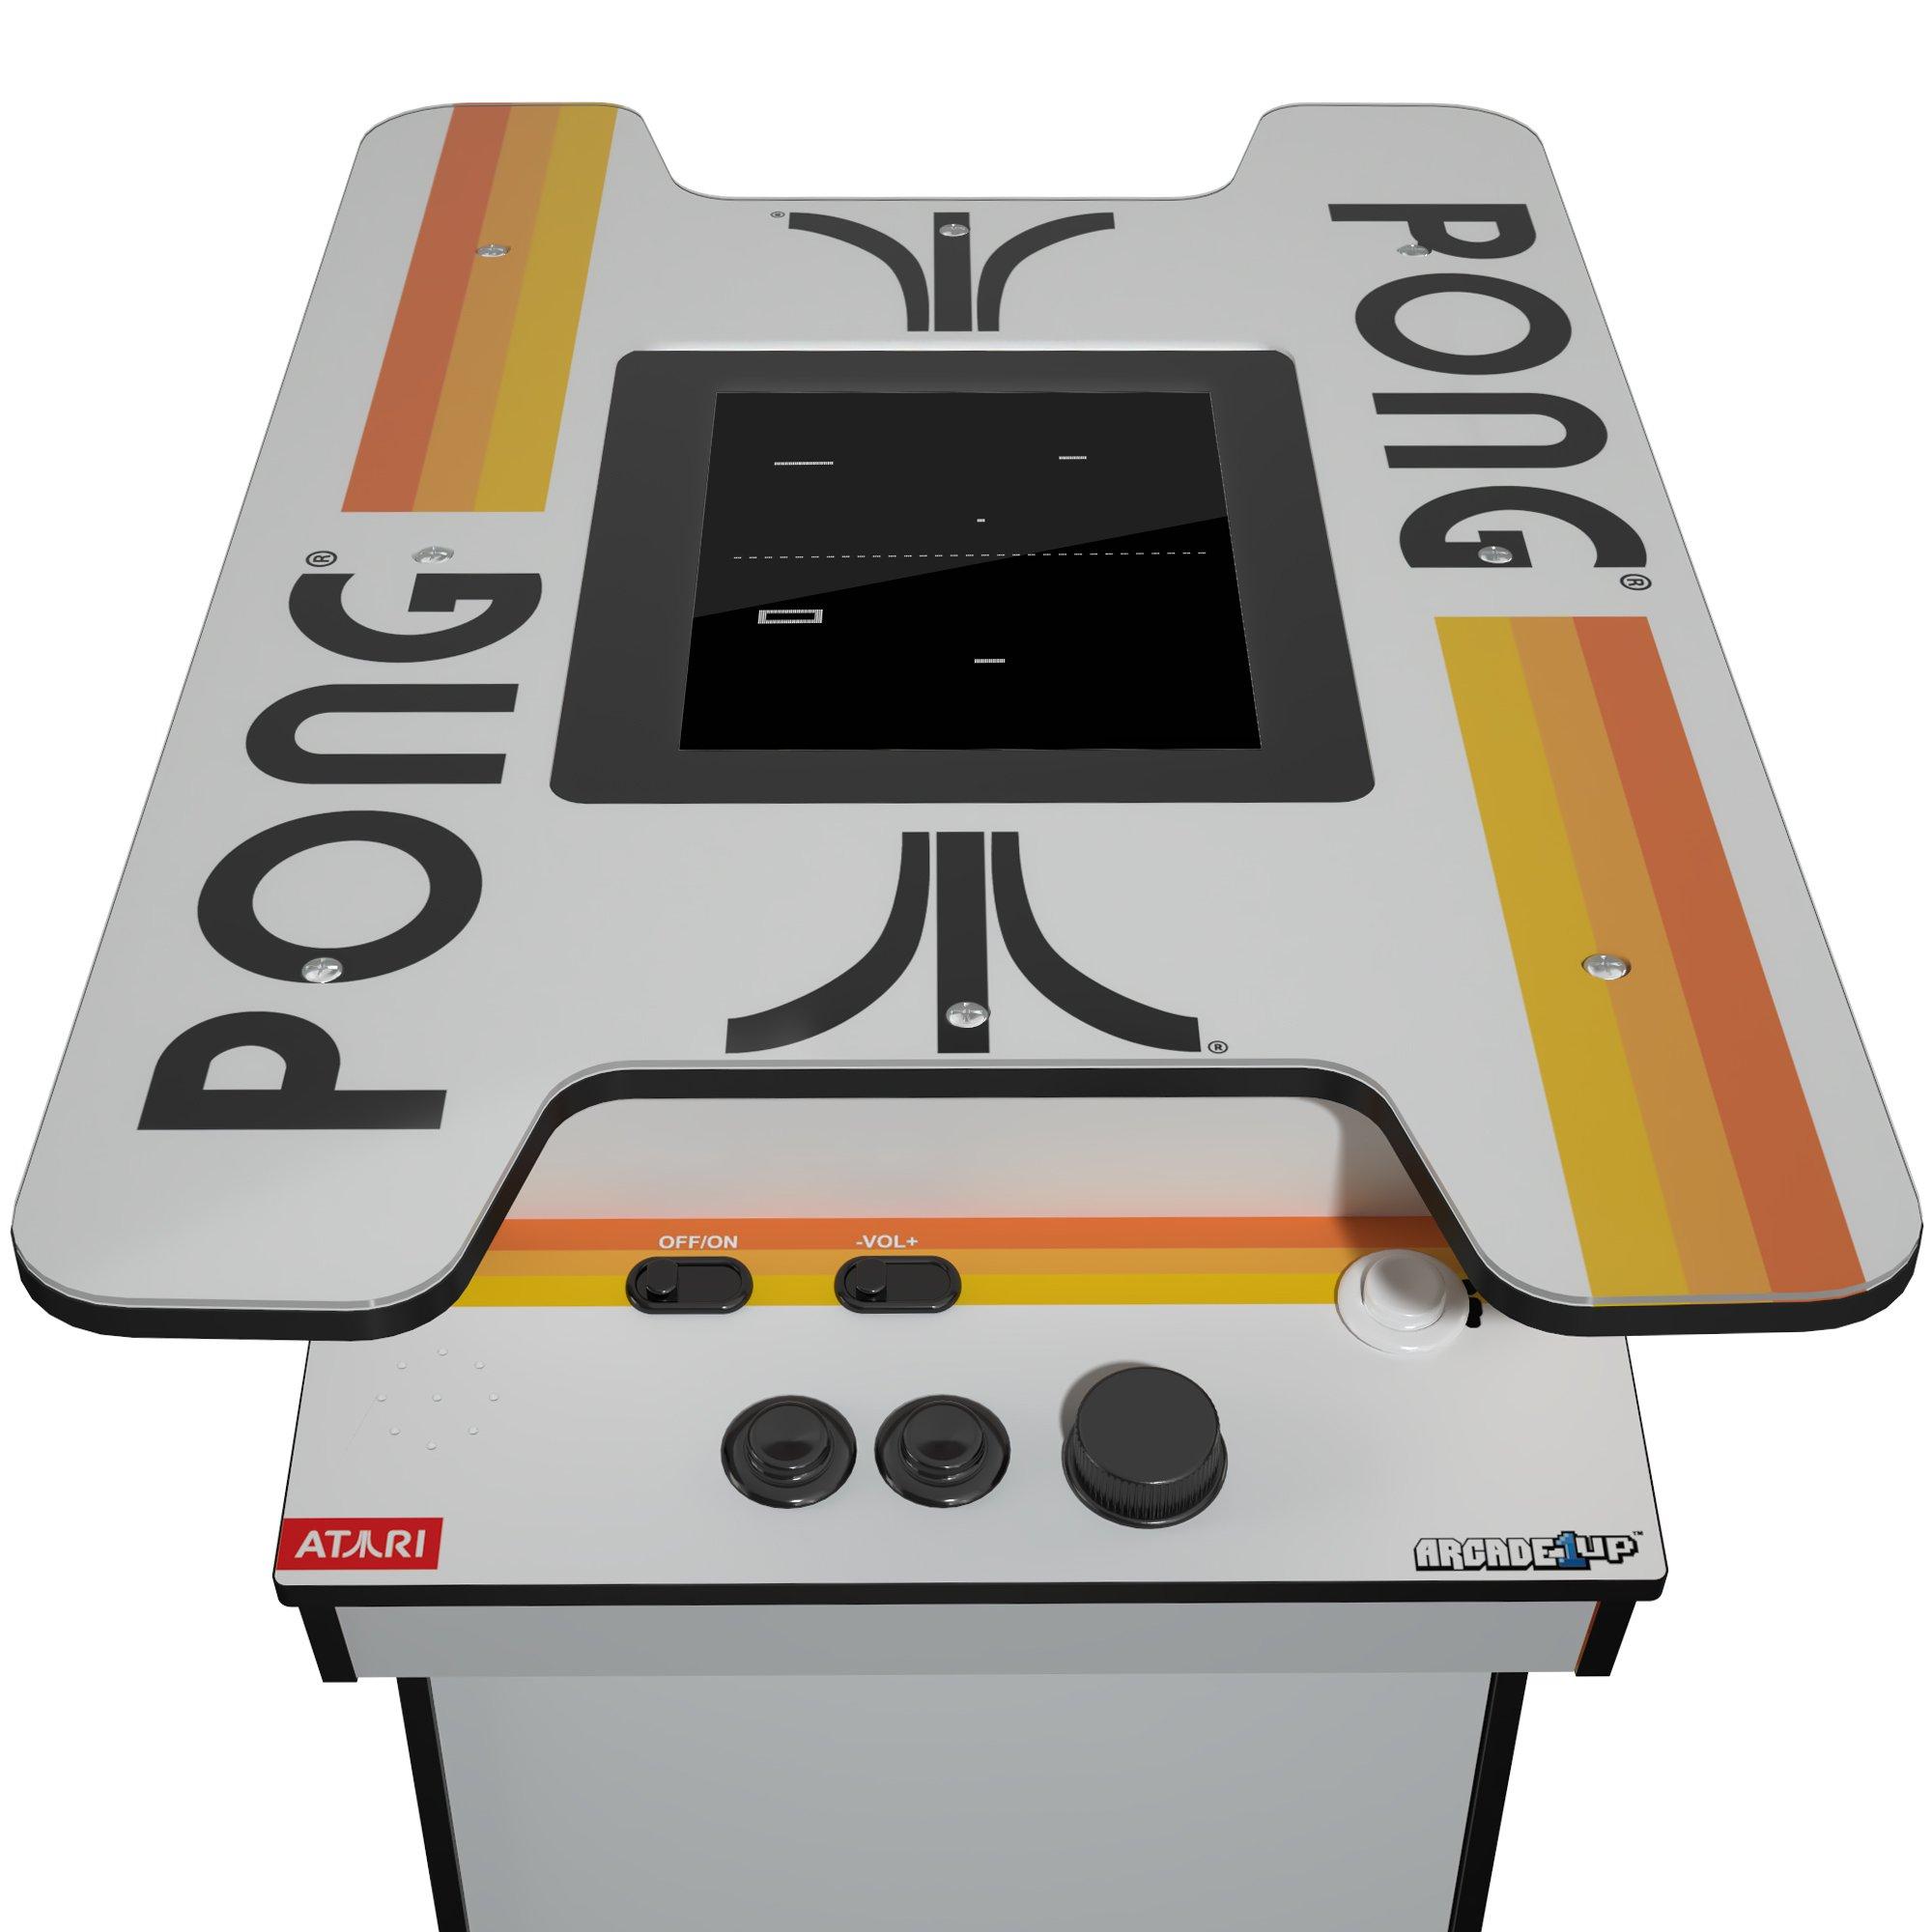 Arcade1Up Pong Head-to-Head Gaming Table